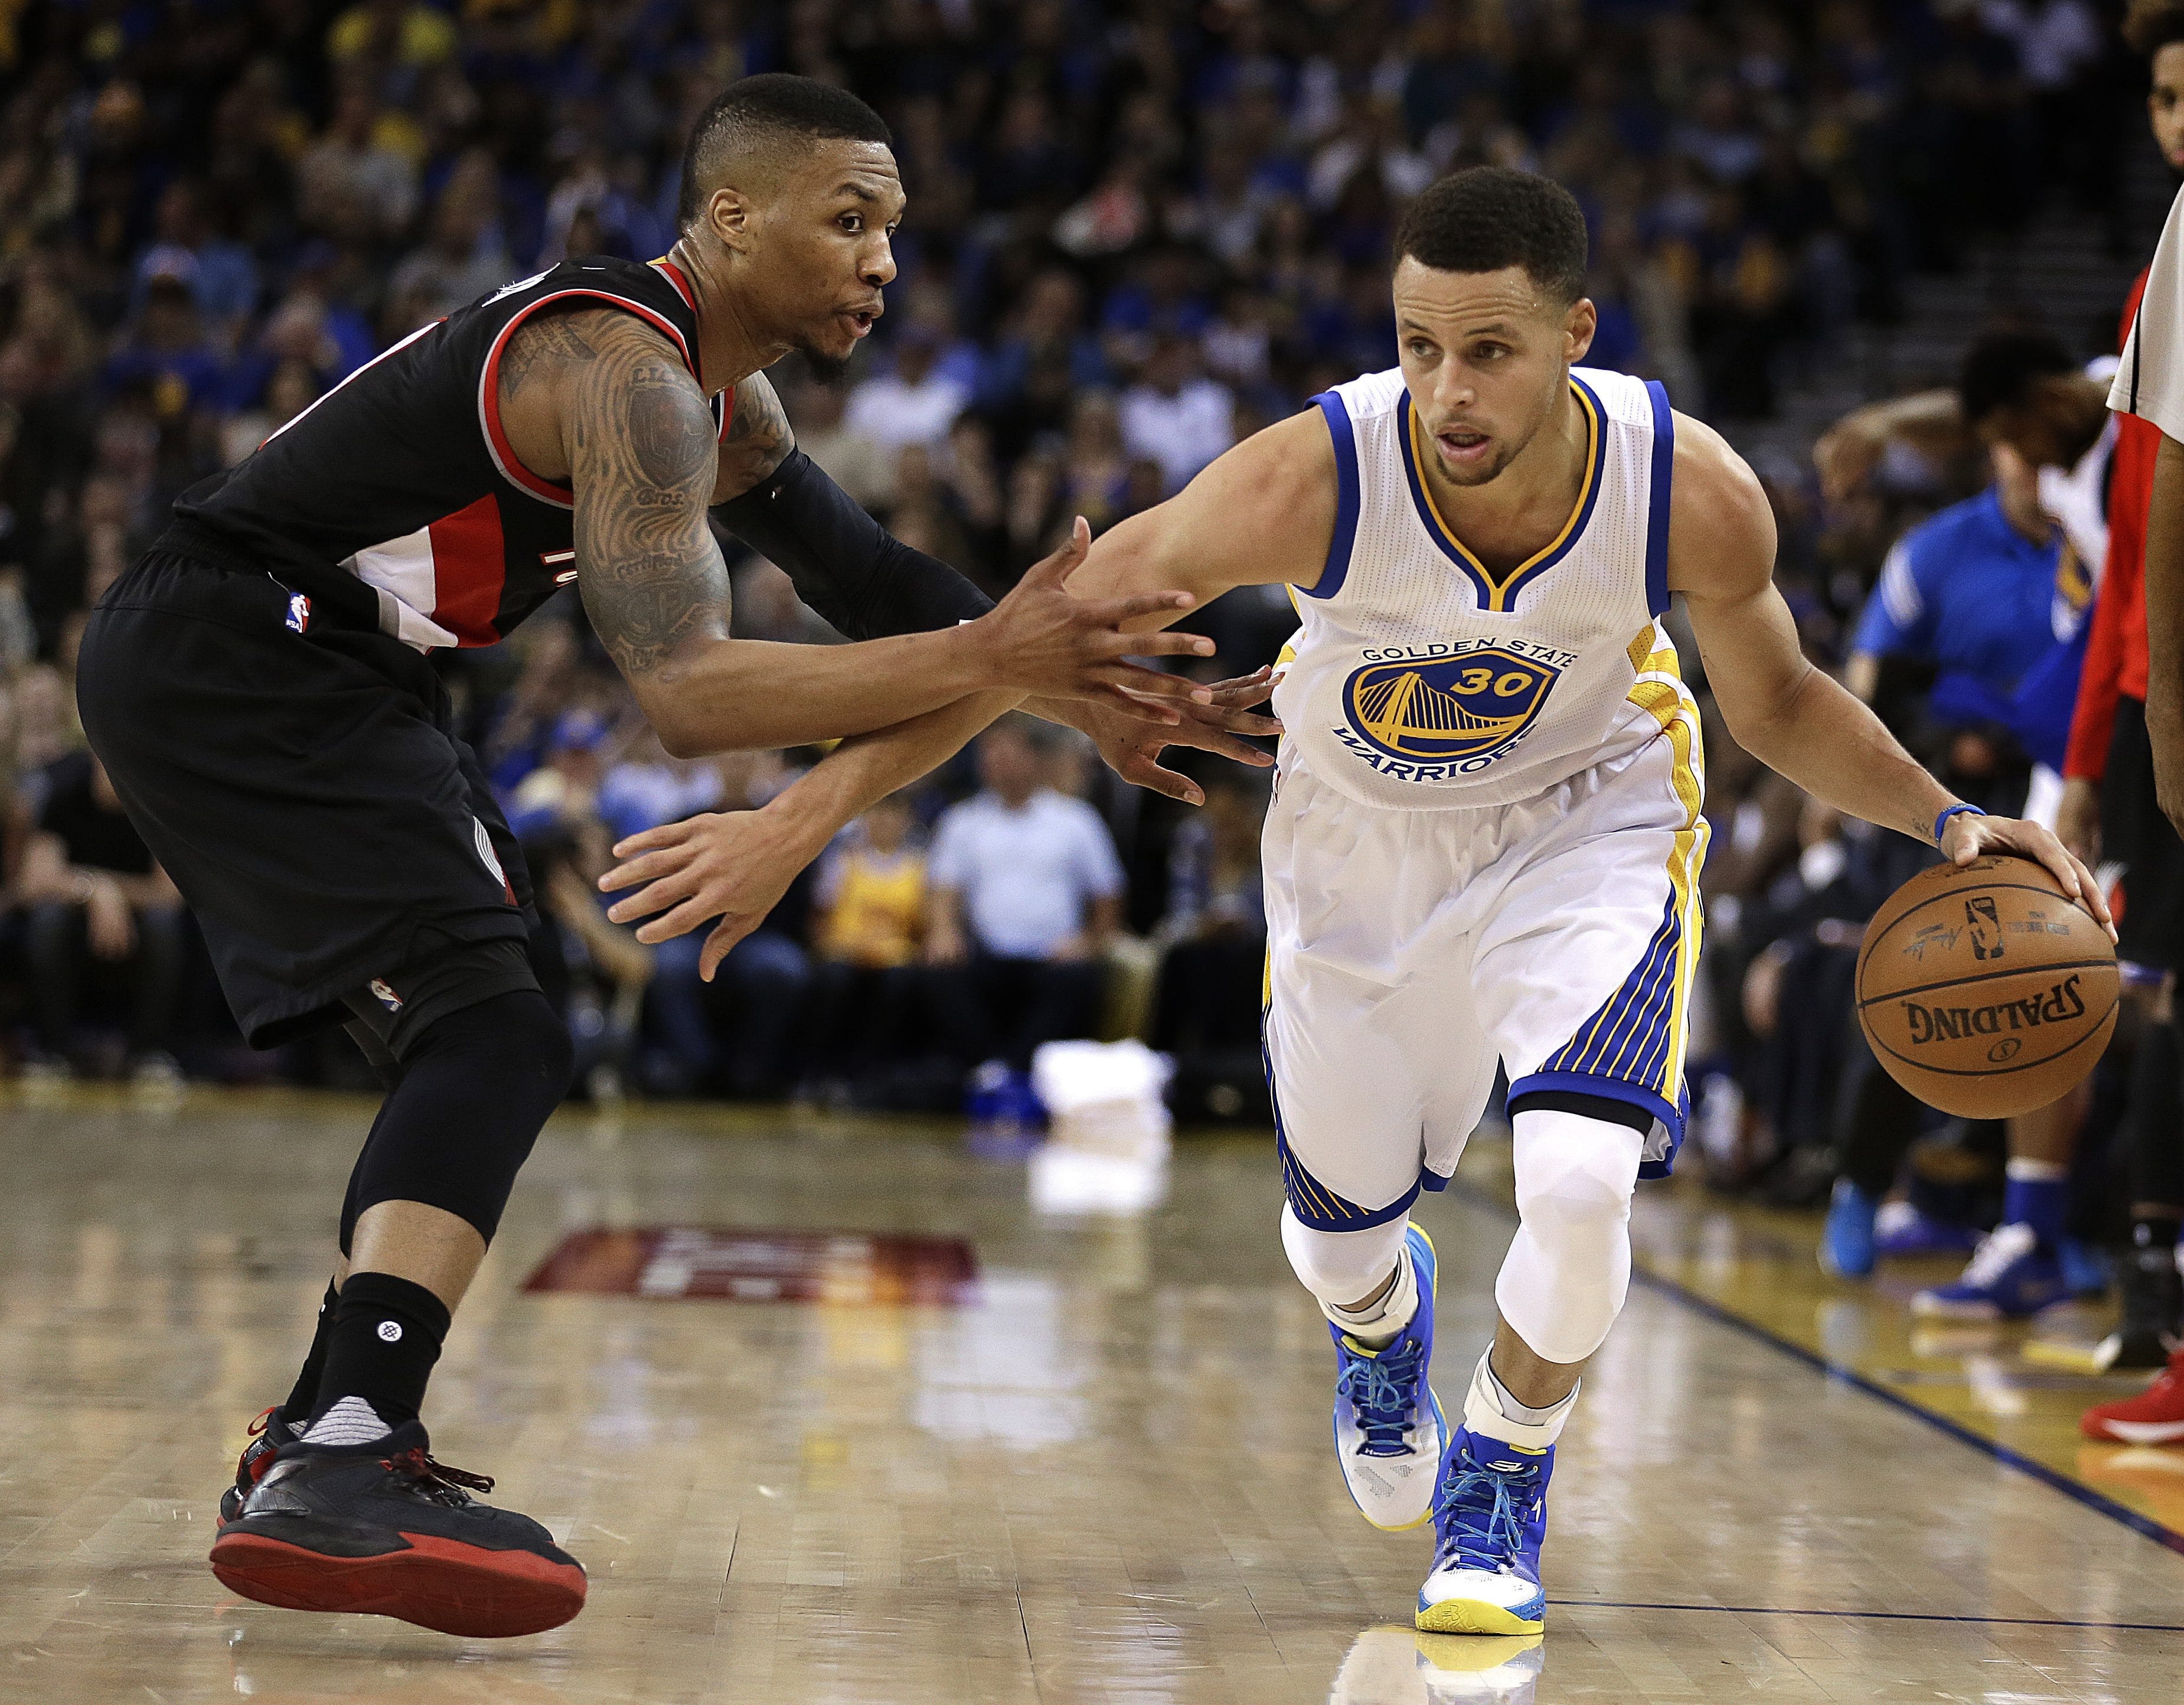 Golden State Warriors' Stephen Curry, right, drives the ball past Portland Trail Blazers' Damian Lillard during the second half of an NBA basketball game Sunday, April 3, 2016, in Oakland, Calif.